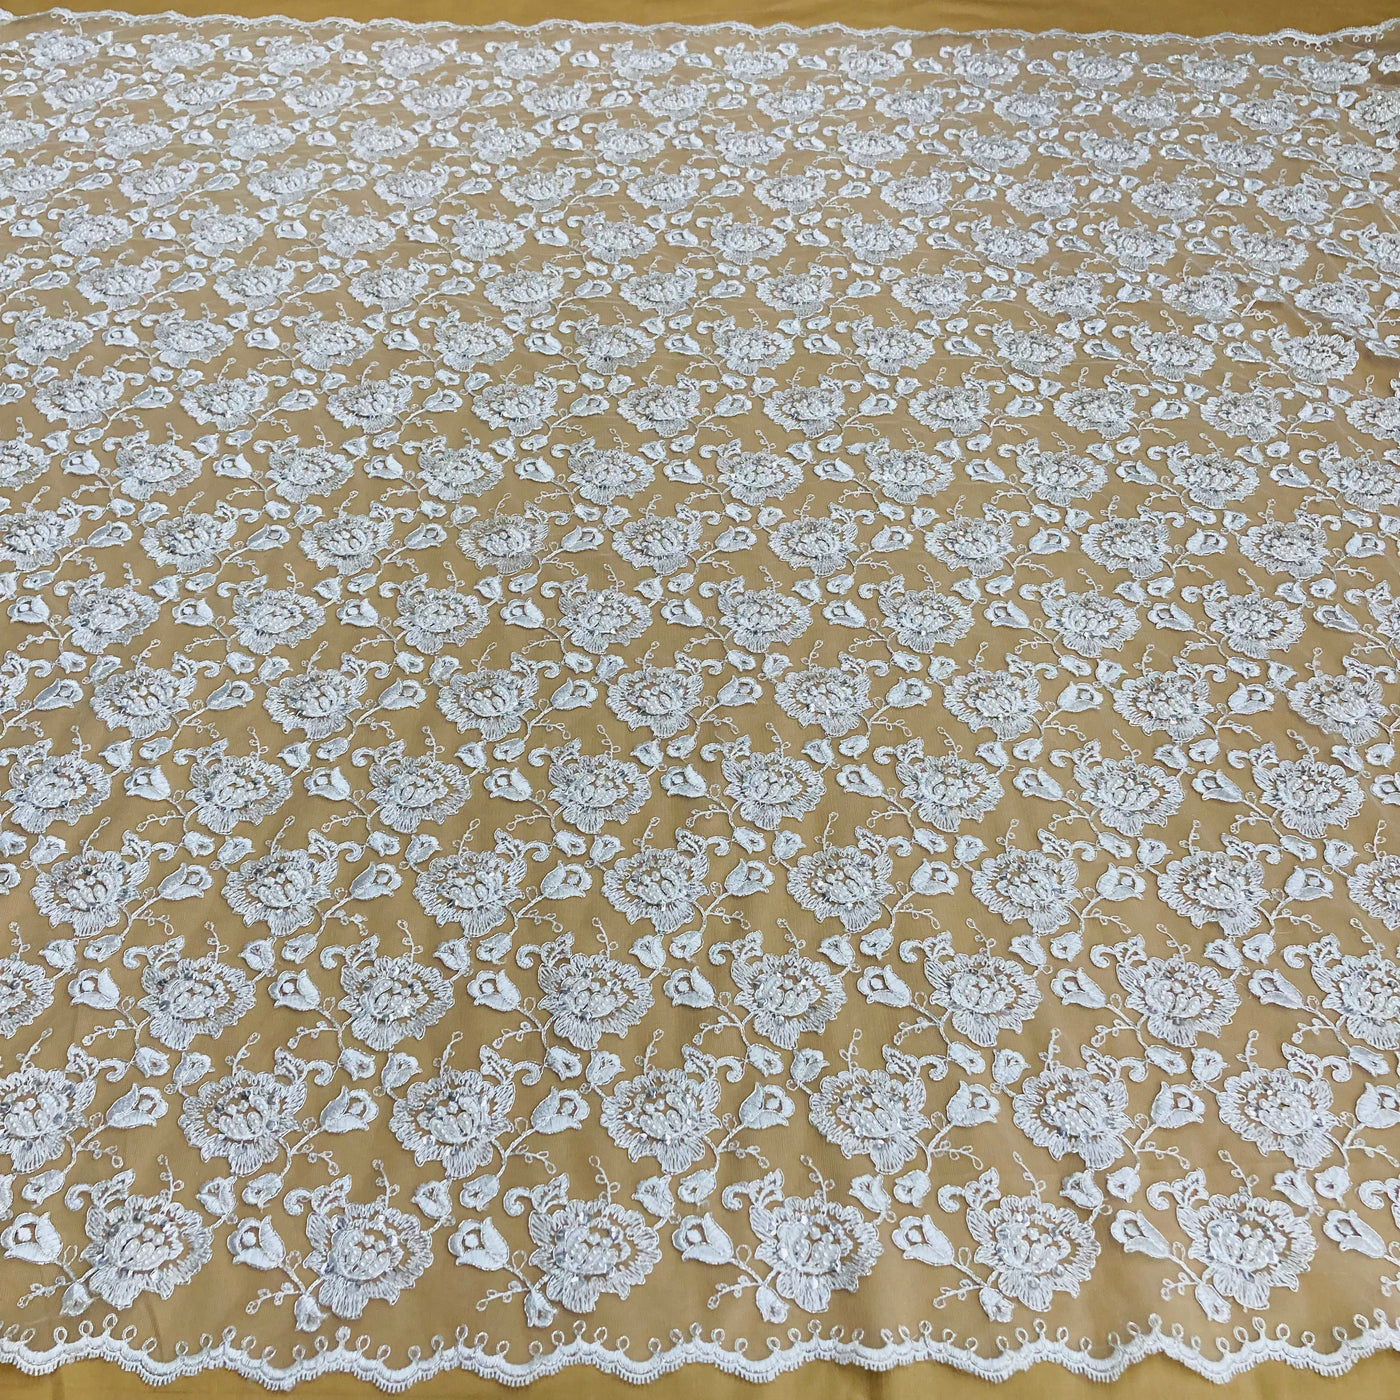 Copy of Beaded & Corded Bridal Lace Fabric Embroidered on 100% Polyester Net Mesh | Lace USA